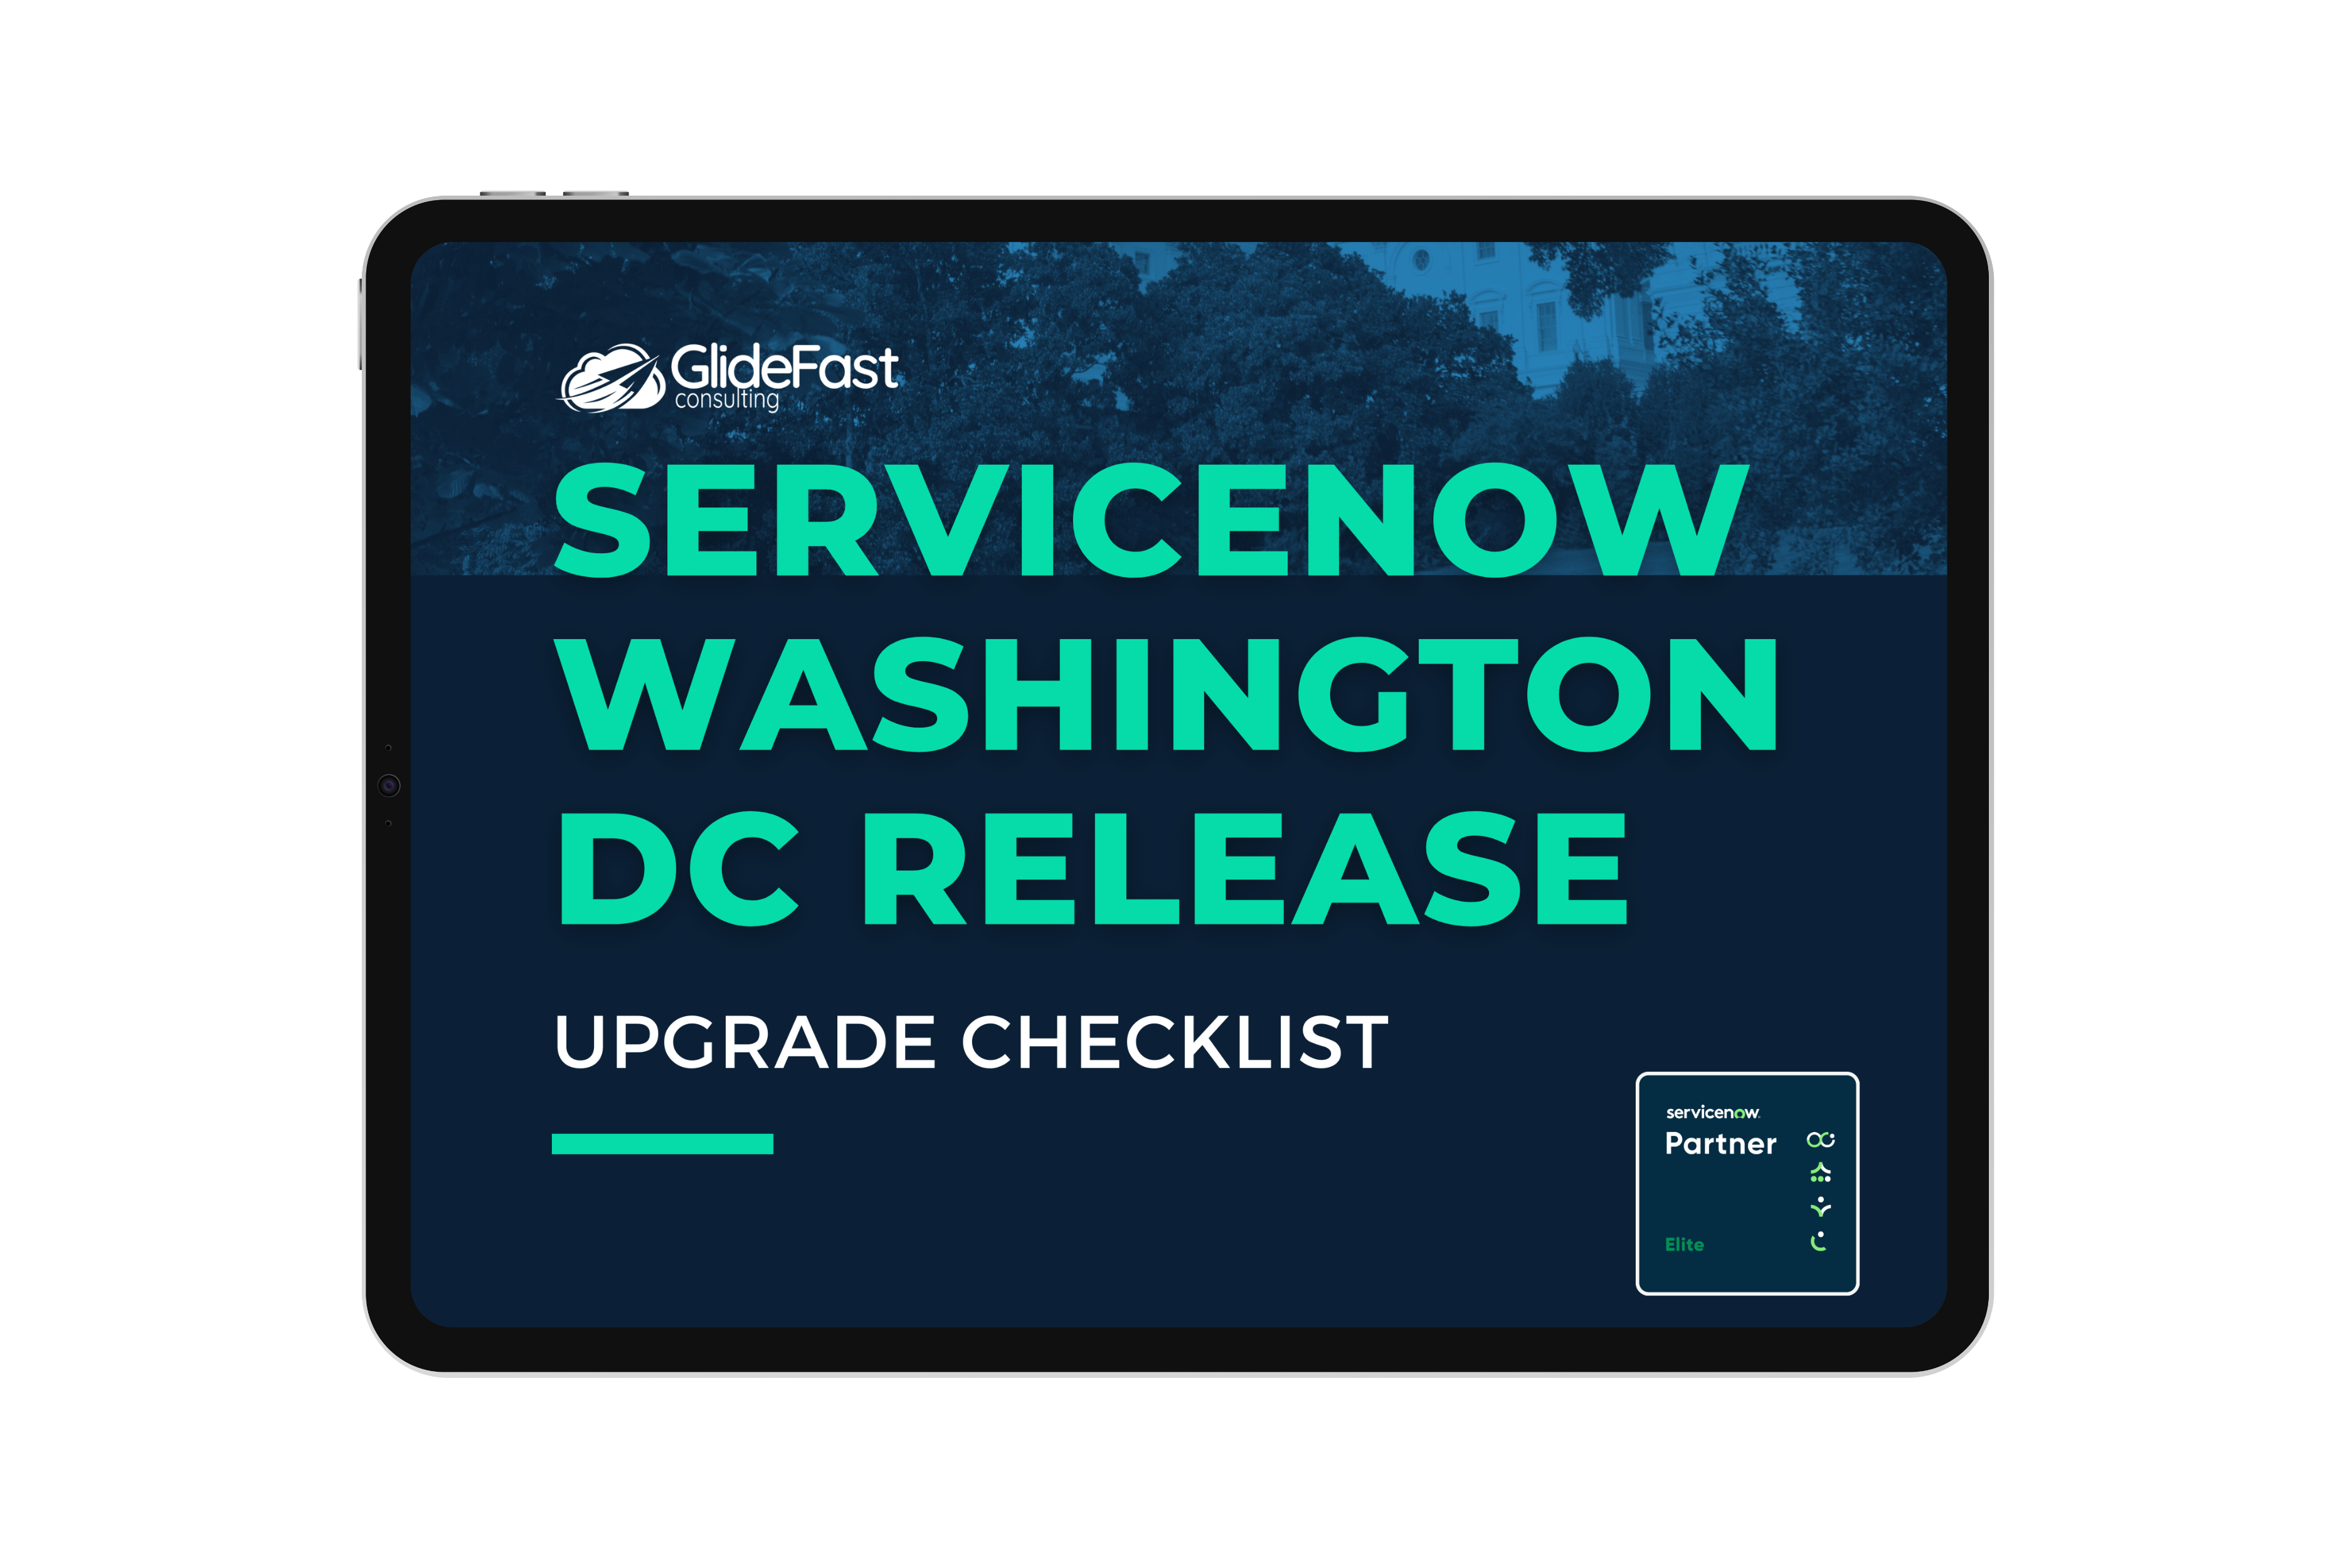 Upgrade to The ServiceNow Washington DC Release